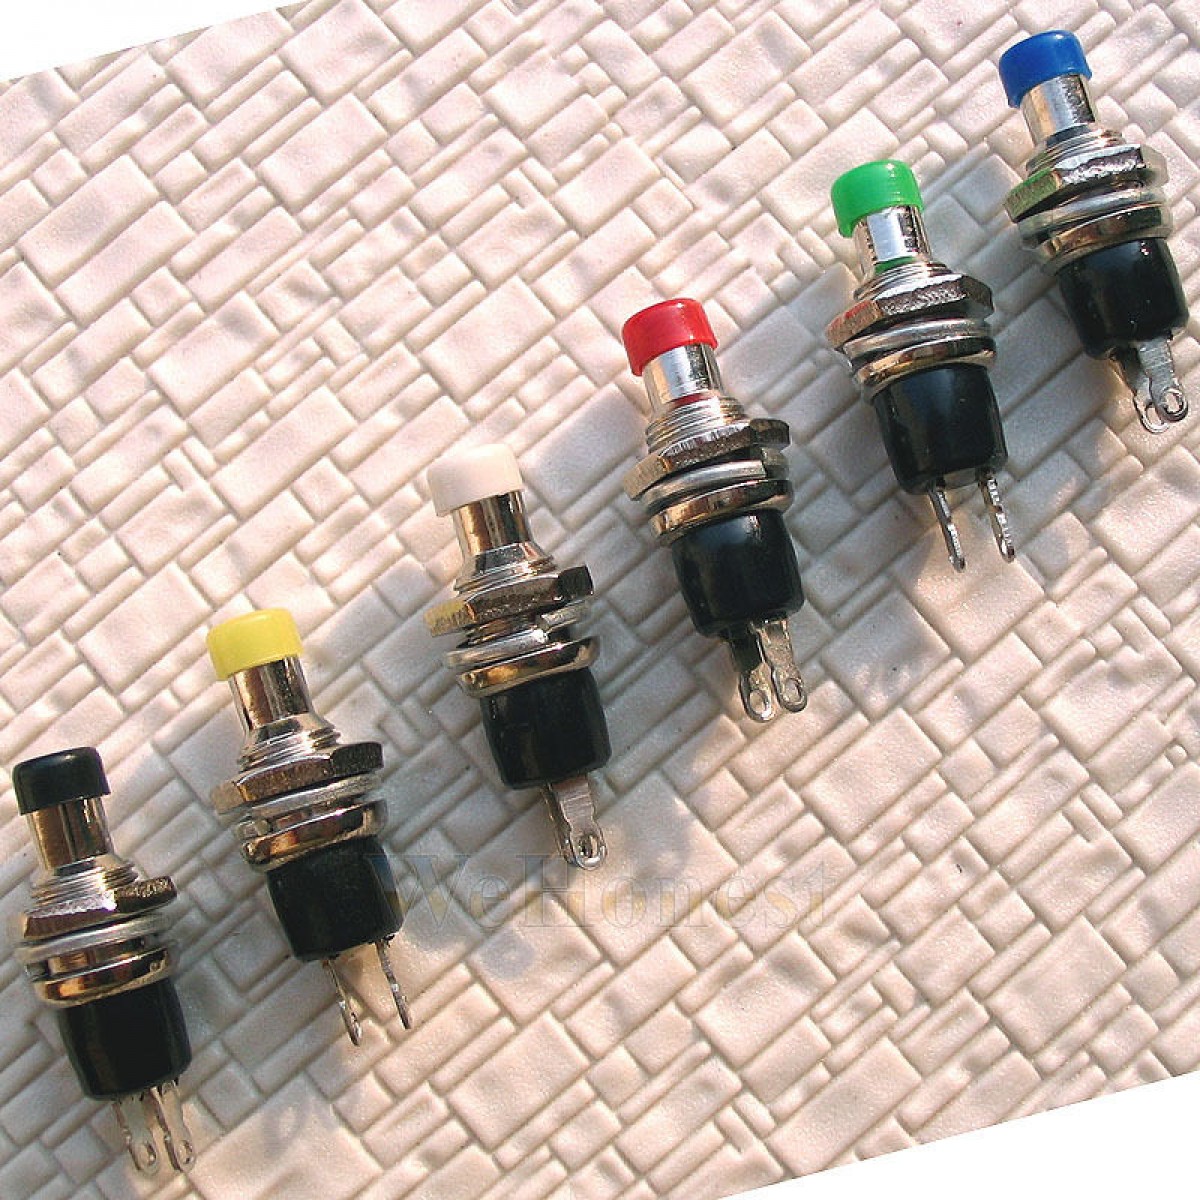   18 x Momentary Push Button Switches Multi-Colors N/Open  (WeHonest)